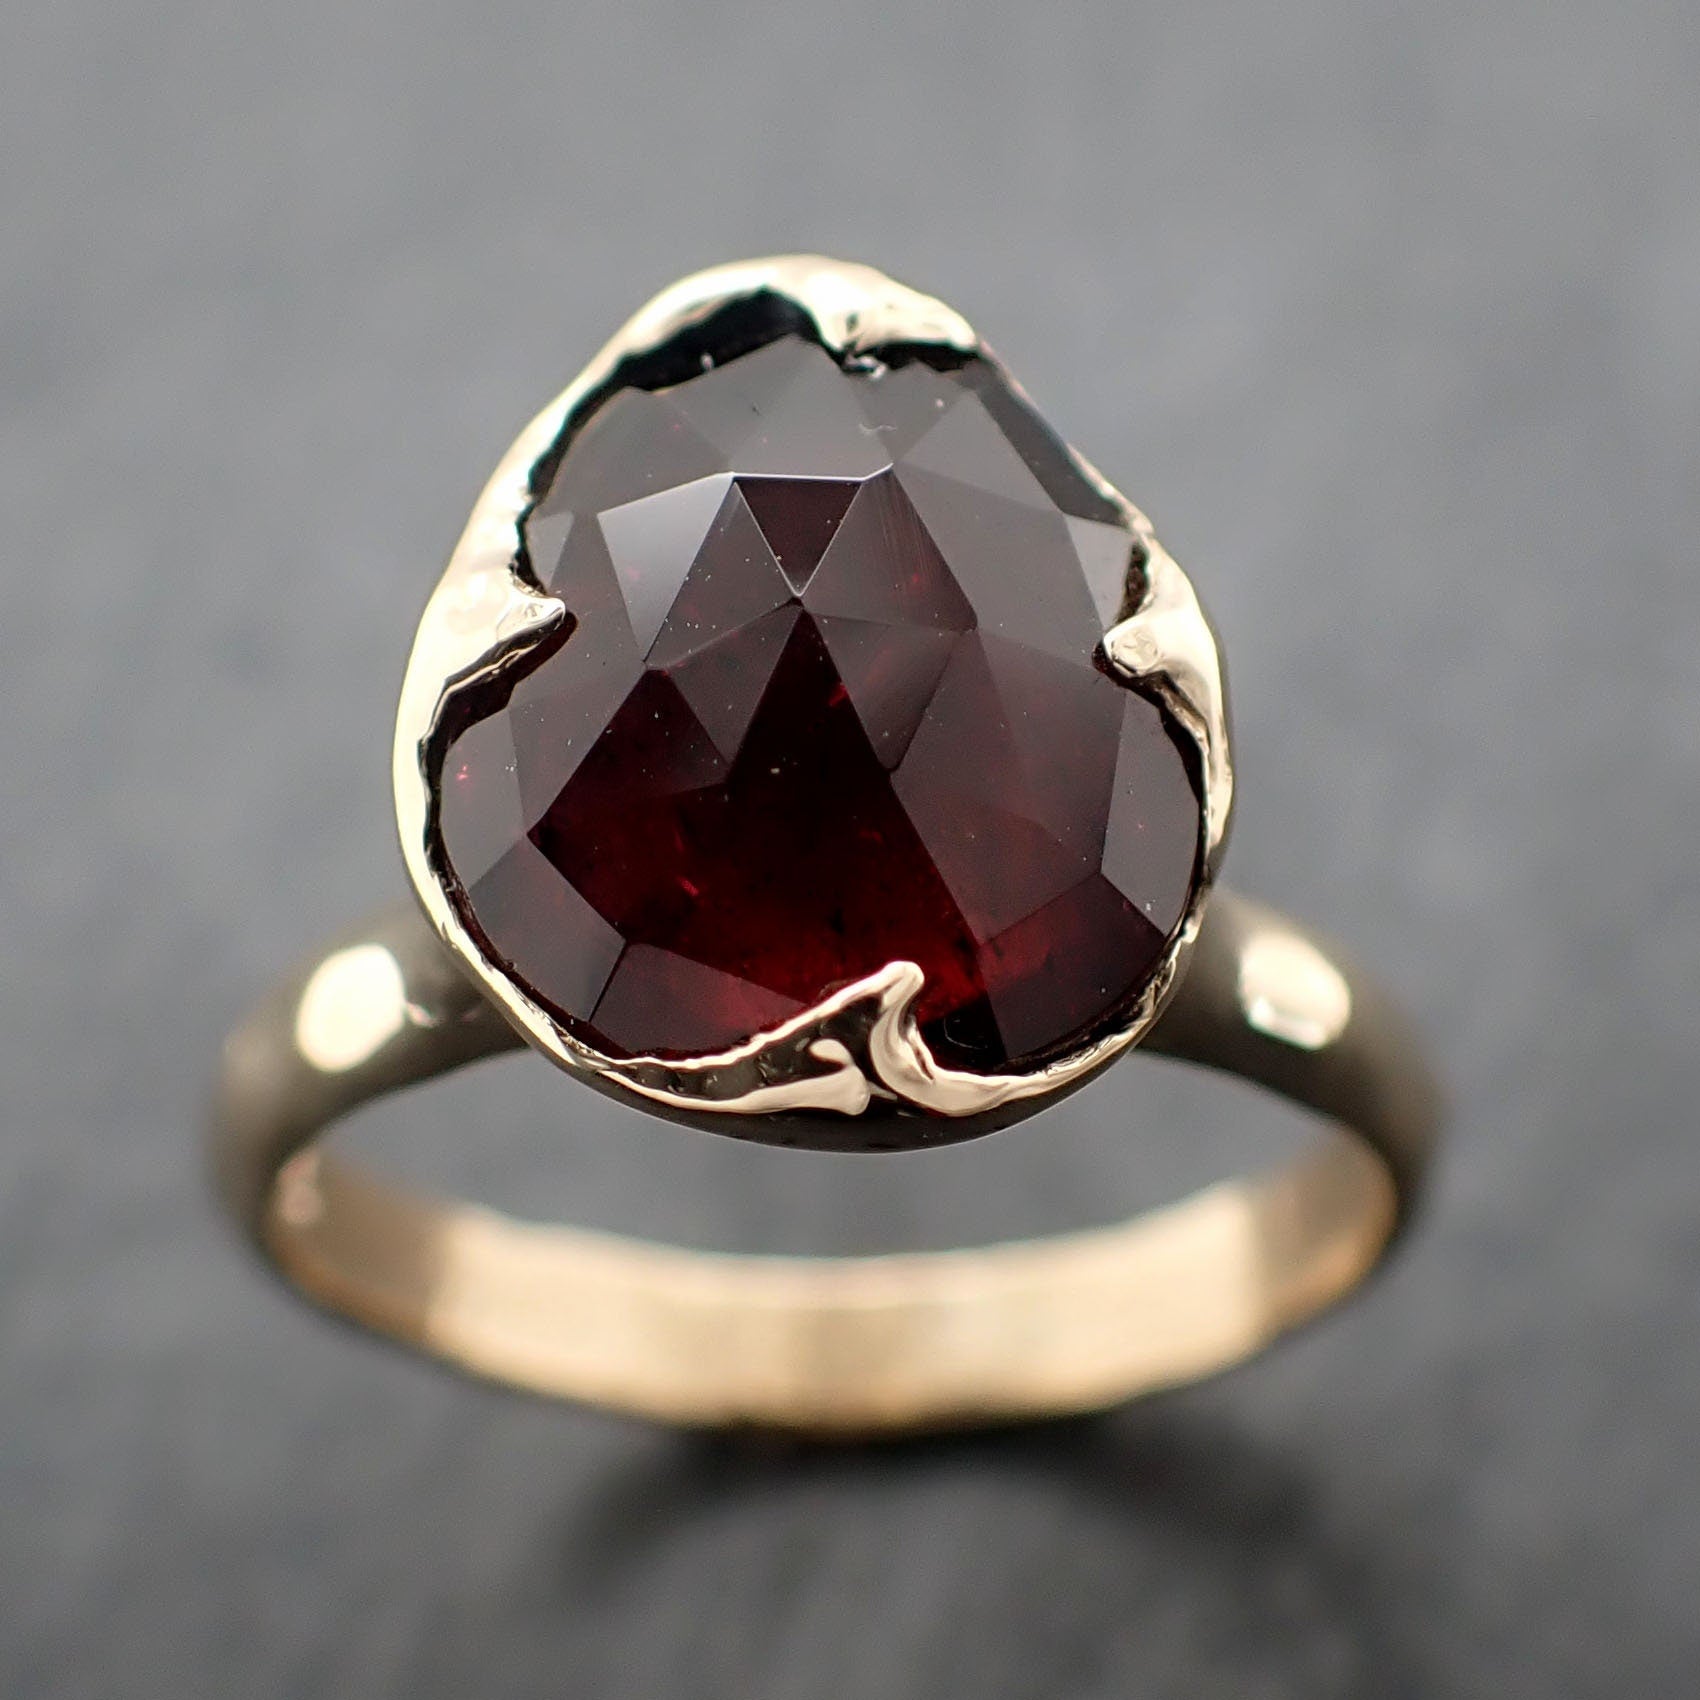 Fancy cut red Tourmaline Gold Ring Gemstone Solitaire recycled 14k yellow gold statement 3312